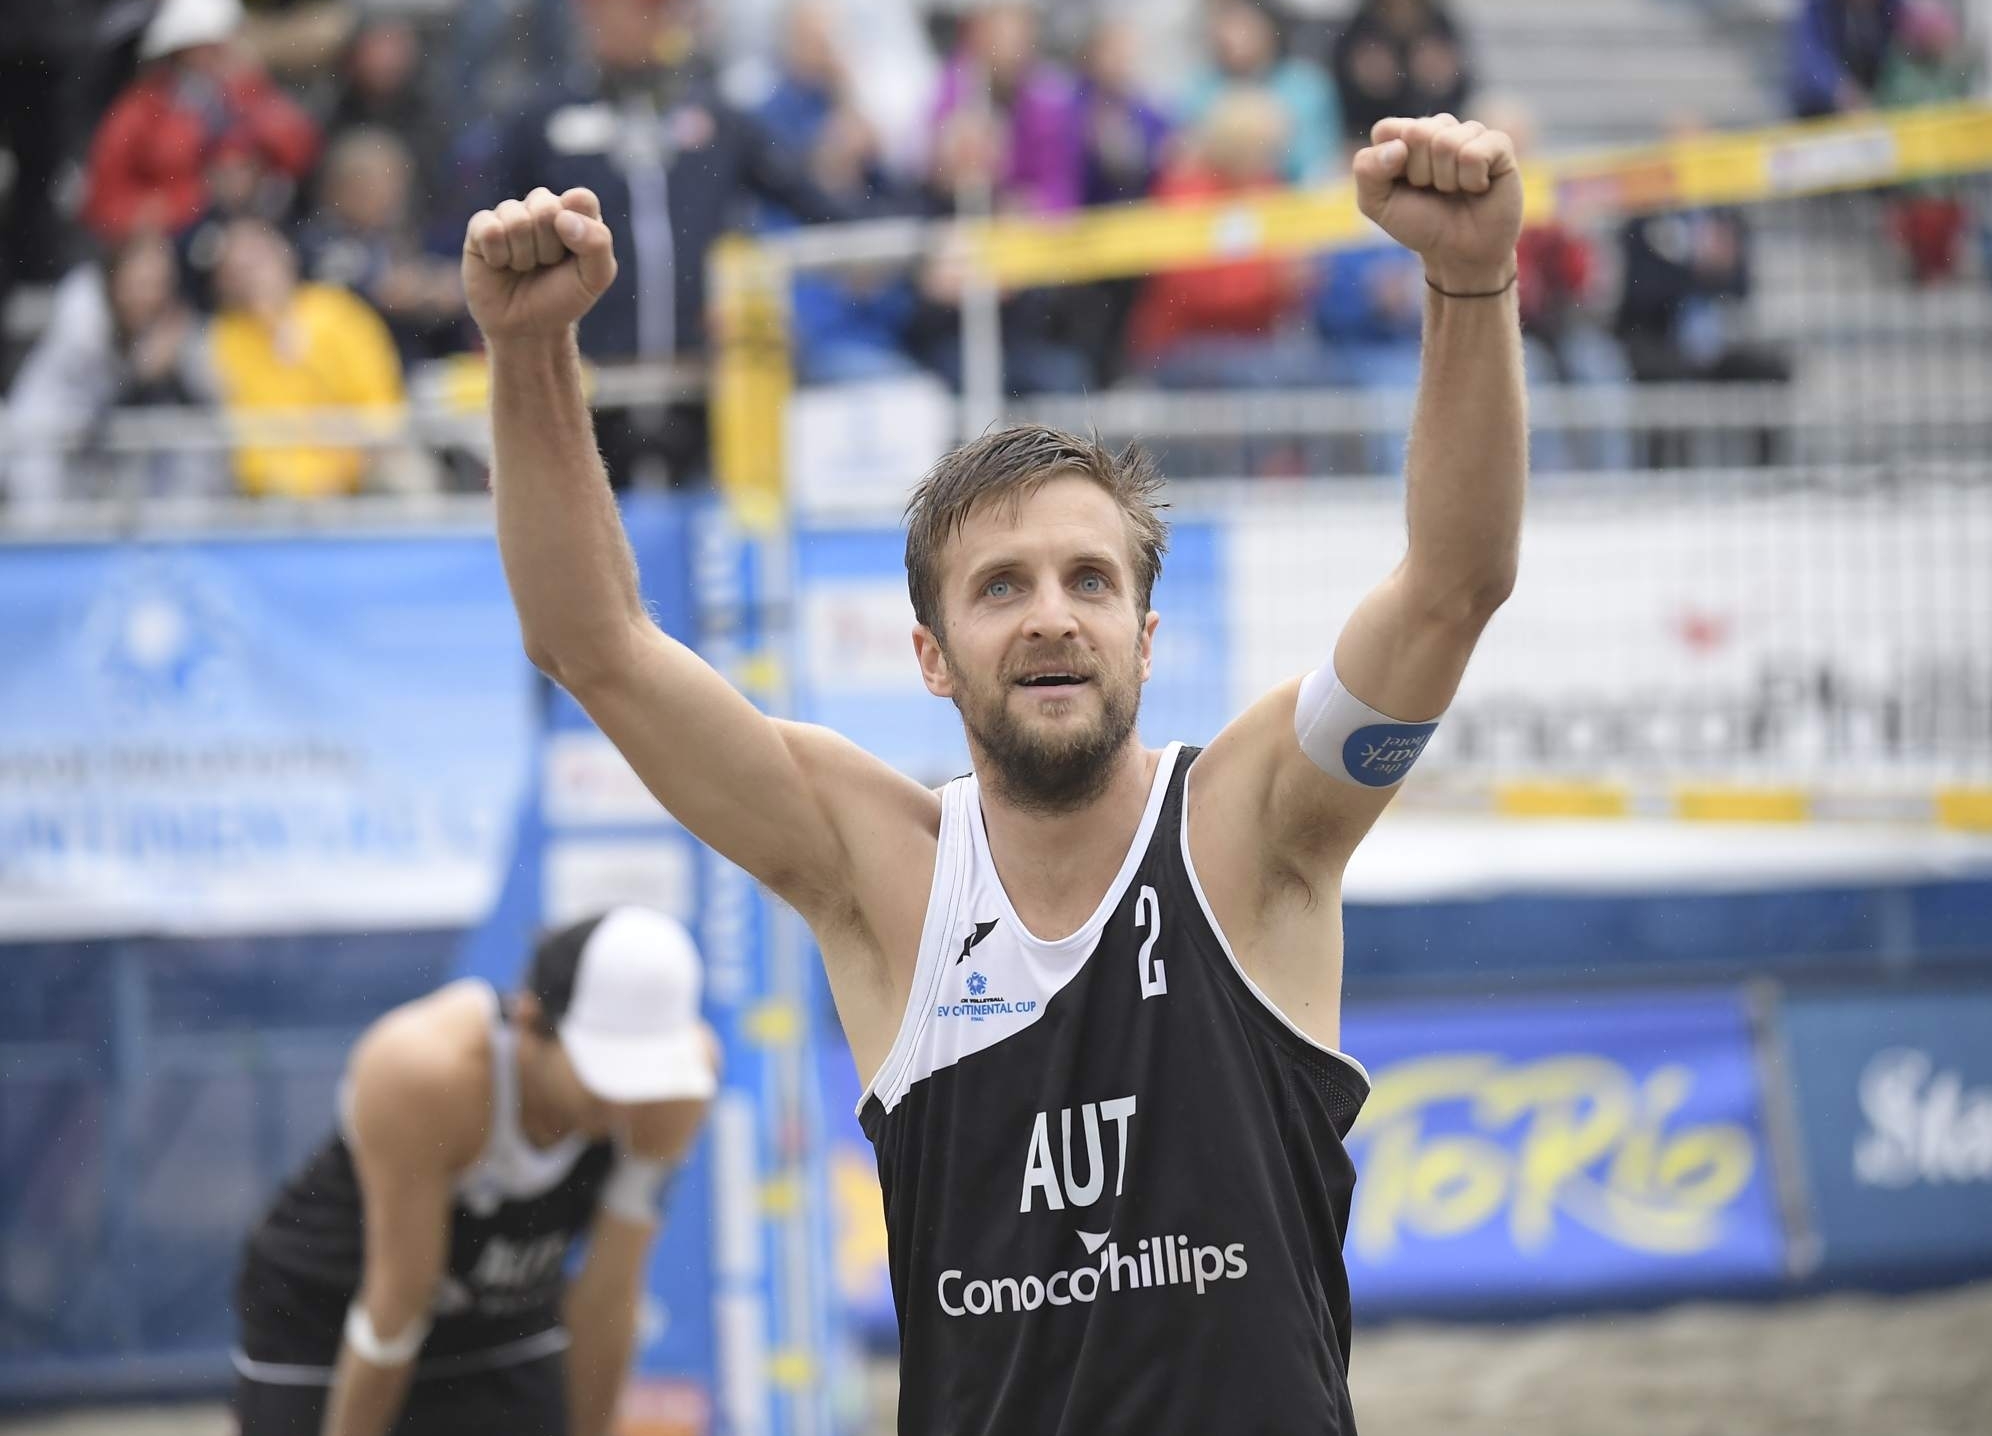 Alexander Huber and Robin Seidl booked Austria’s second ticket to Rio in Stavanger. Photocredit: CEV.